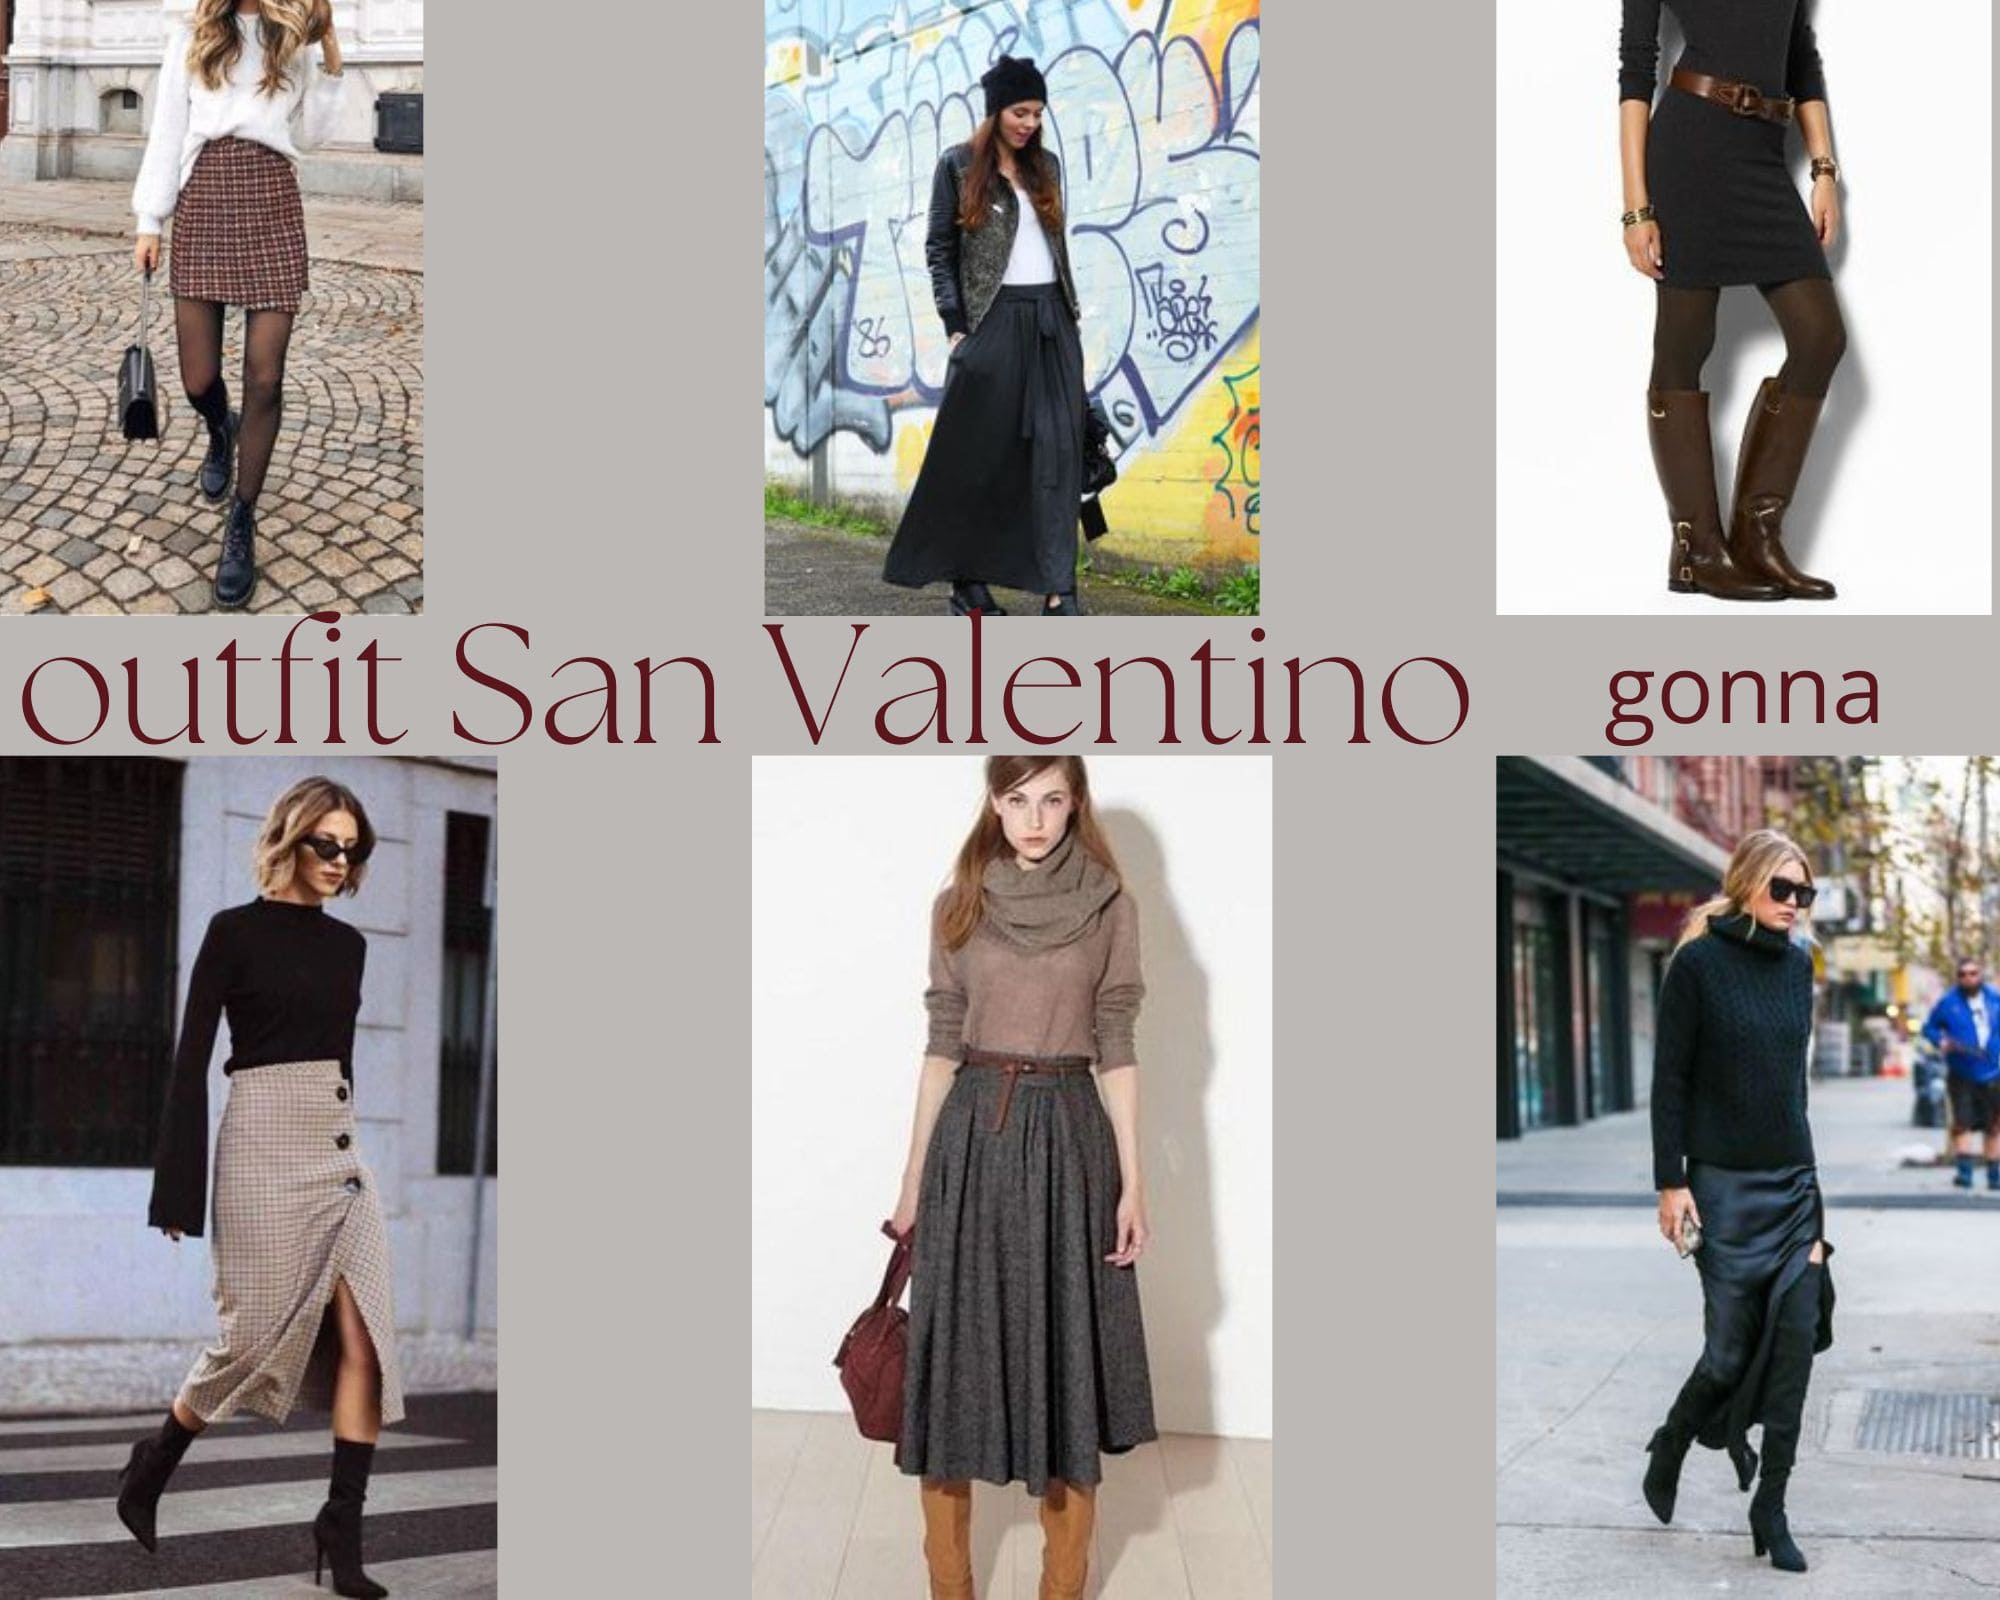 Outfit San Valentino 2023: Gonna